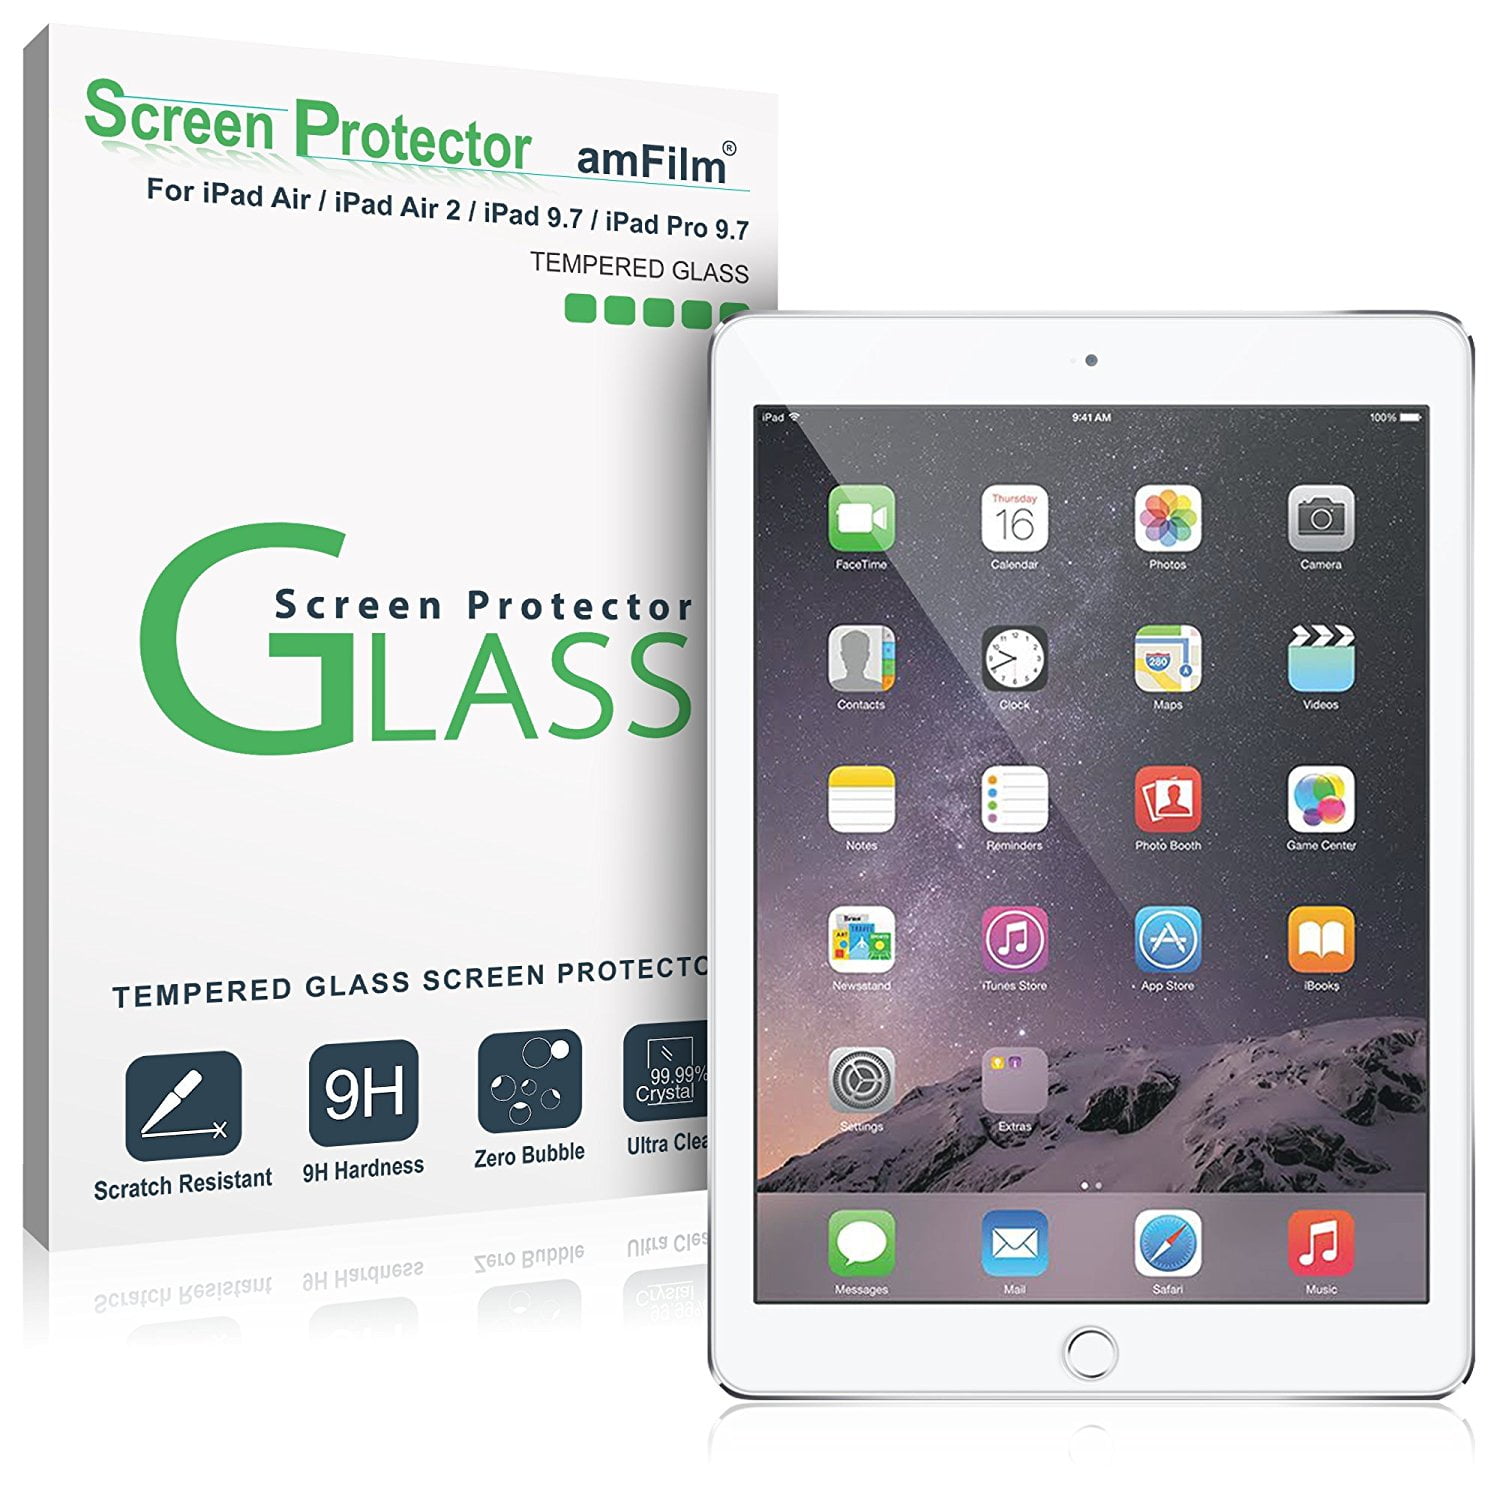 9.7" / iPad Pro 9.7" Tempered Glass Screen Protector For Apple iPad Air 1 & 2 